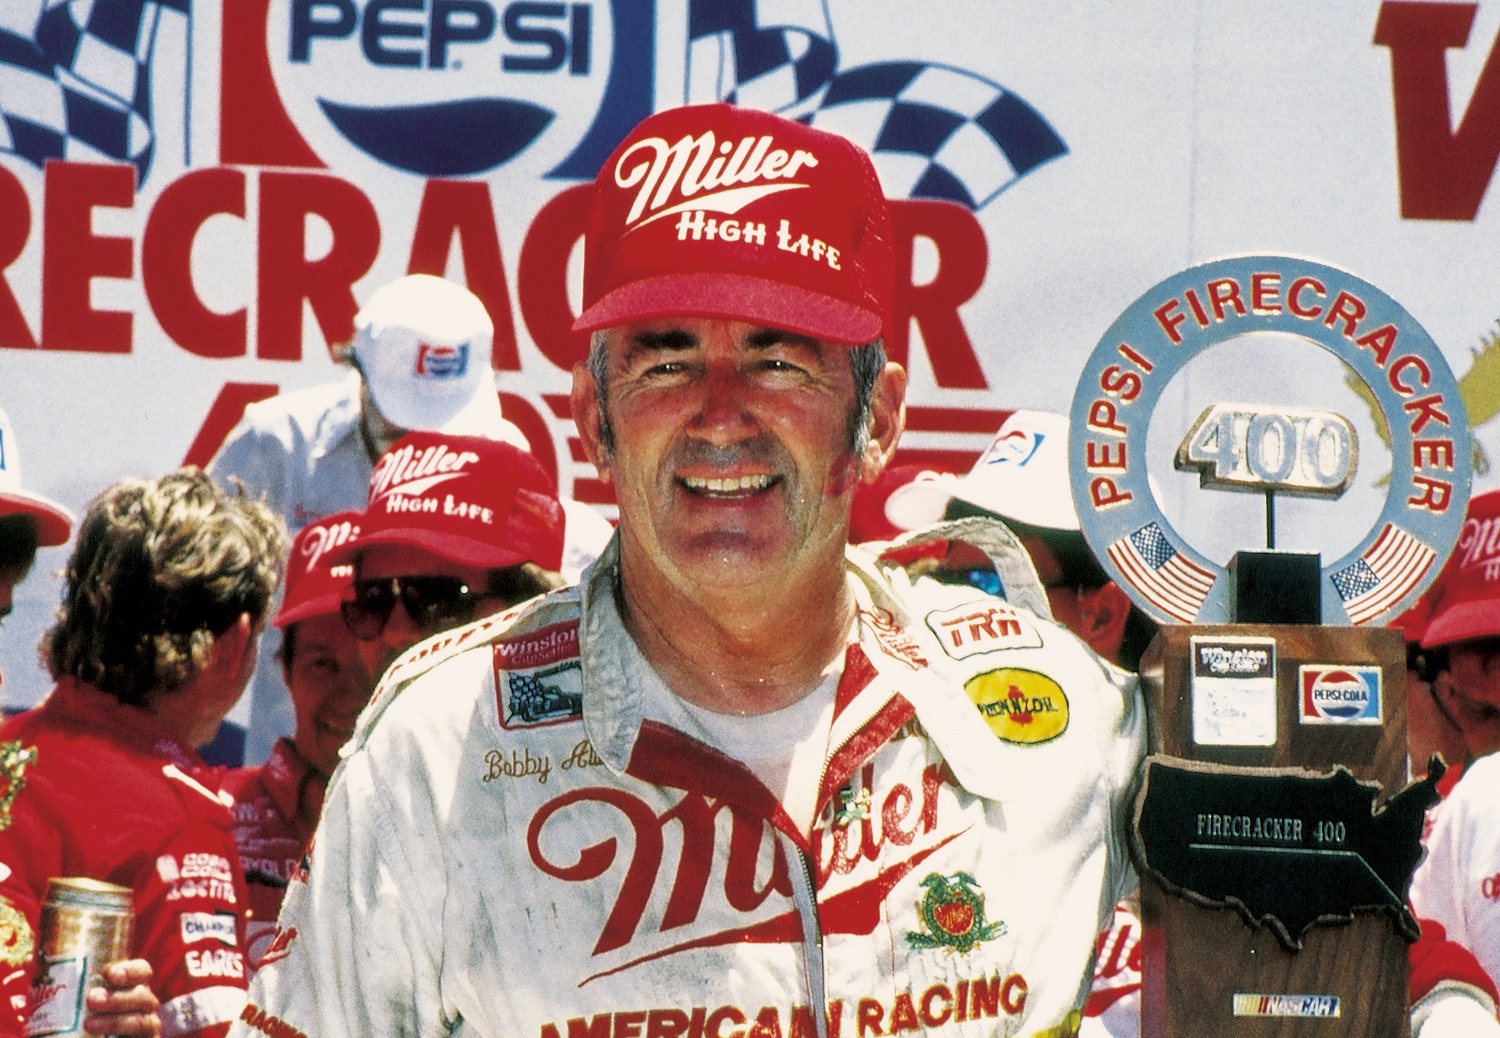 Bobby Allison poses by his car at Daytona Beach, Florida, on July 4, 1987. He took the lead with two laps remaining to win the 1987 Pepsi 400 at Daytona in the Stavola Bros. Buick. ISC Archives/CQ-Roll Call Group via Getty Images